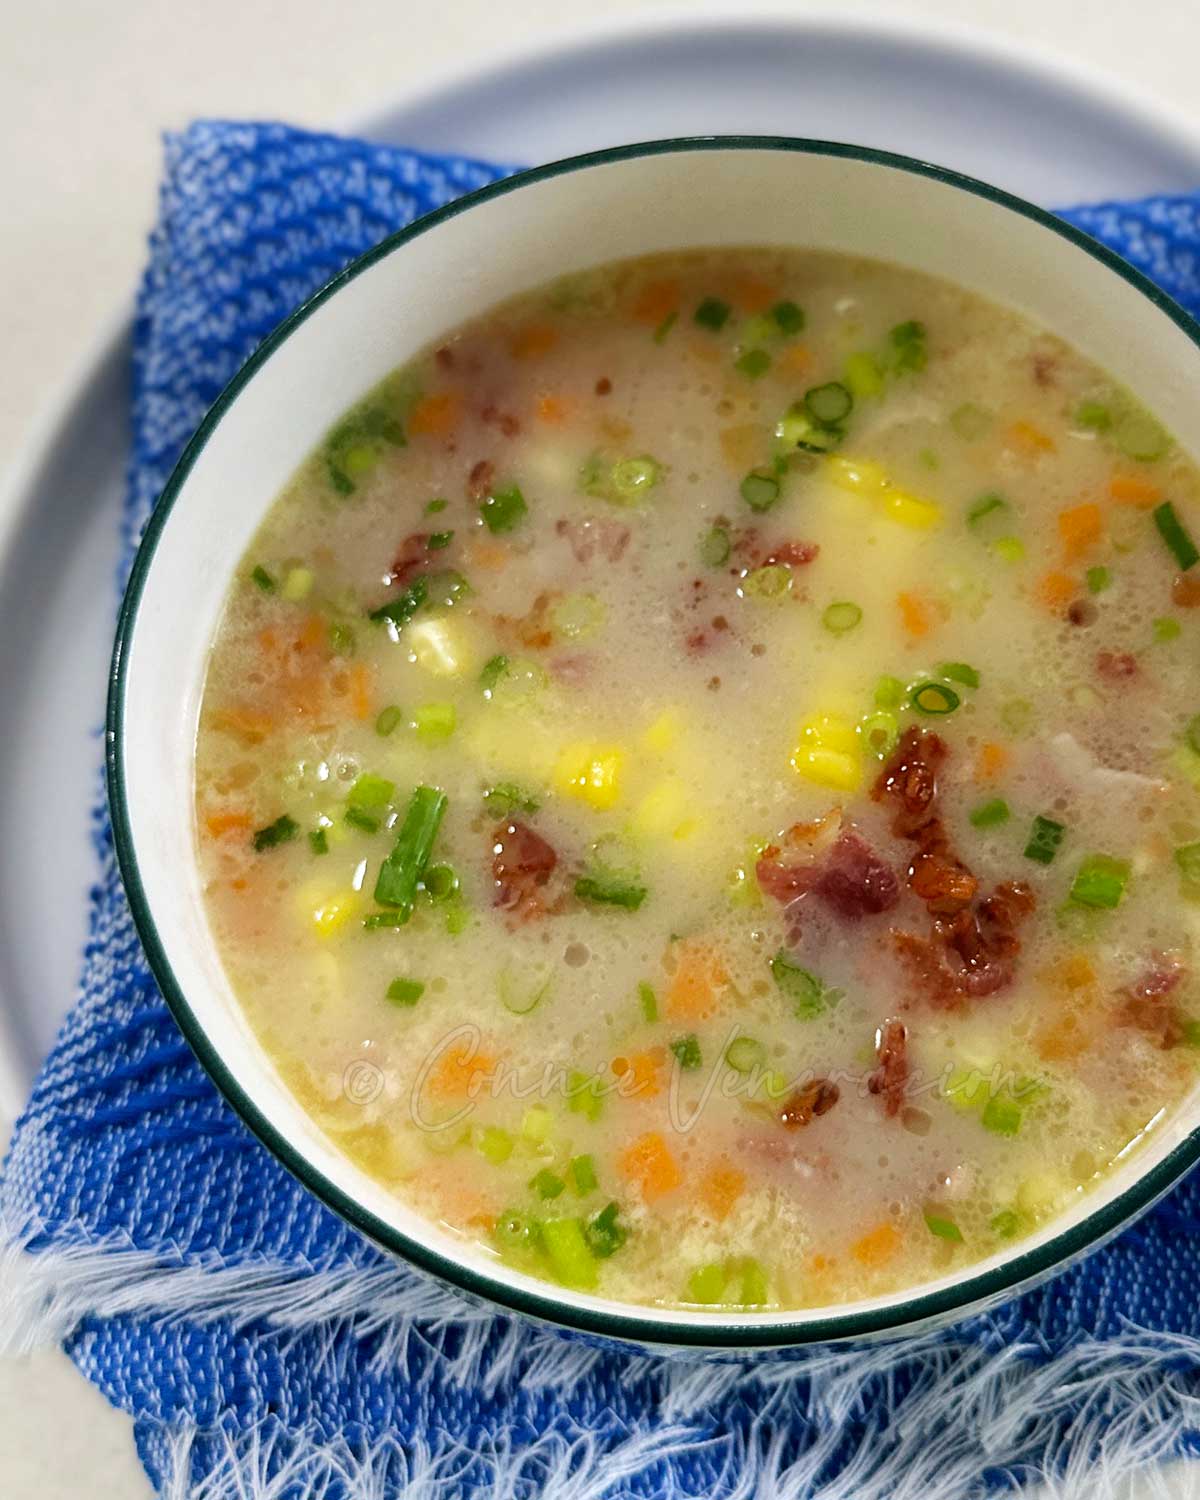 Corn, carrot and bacon soup